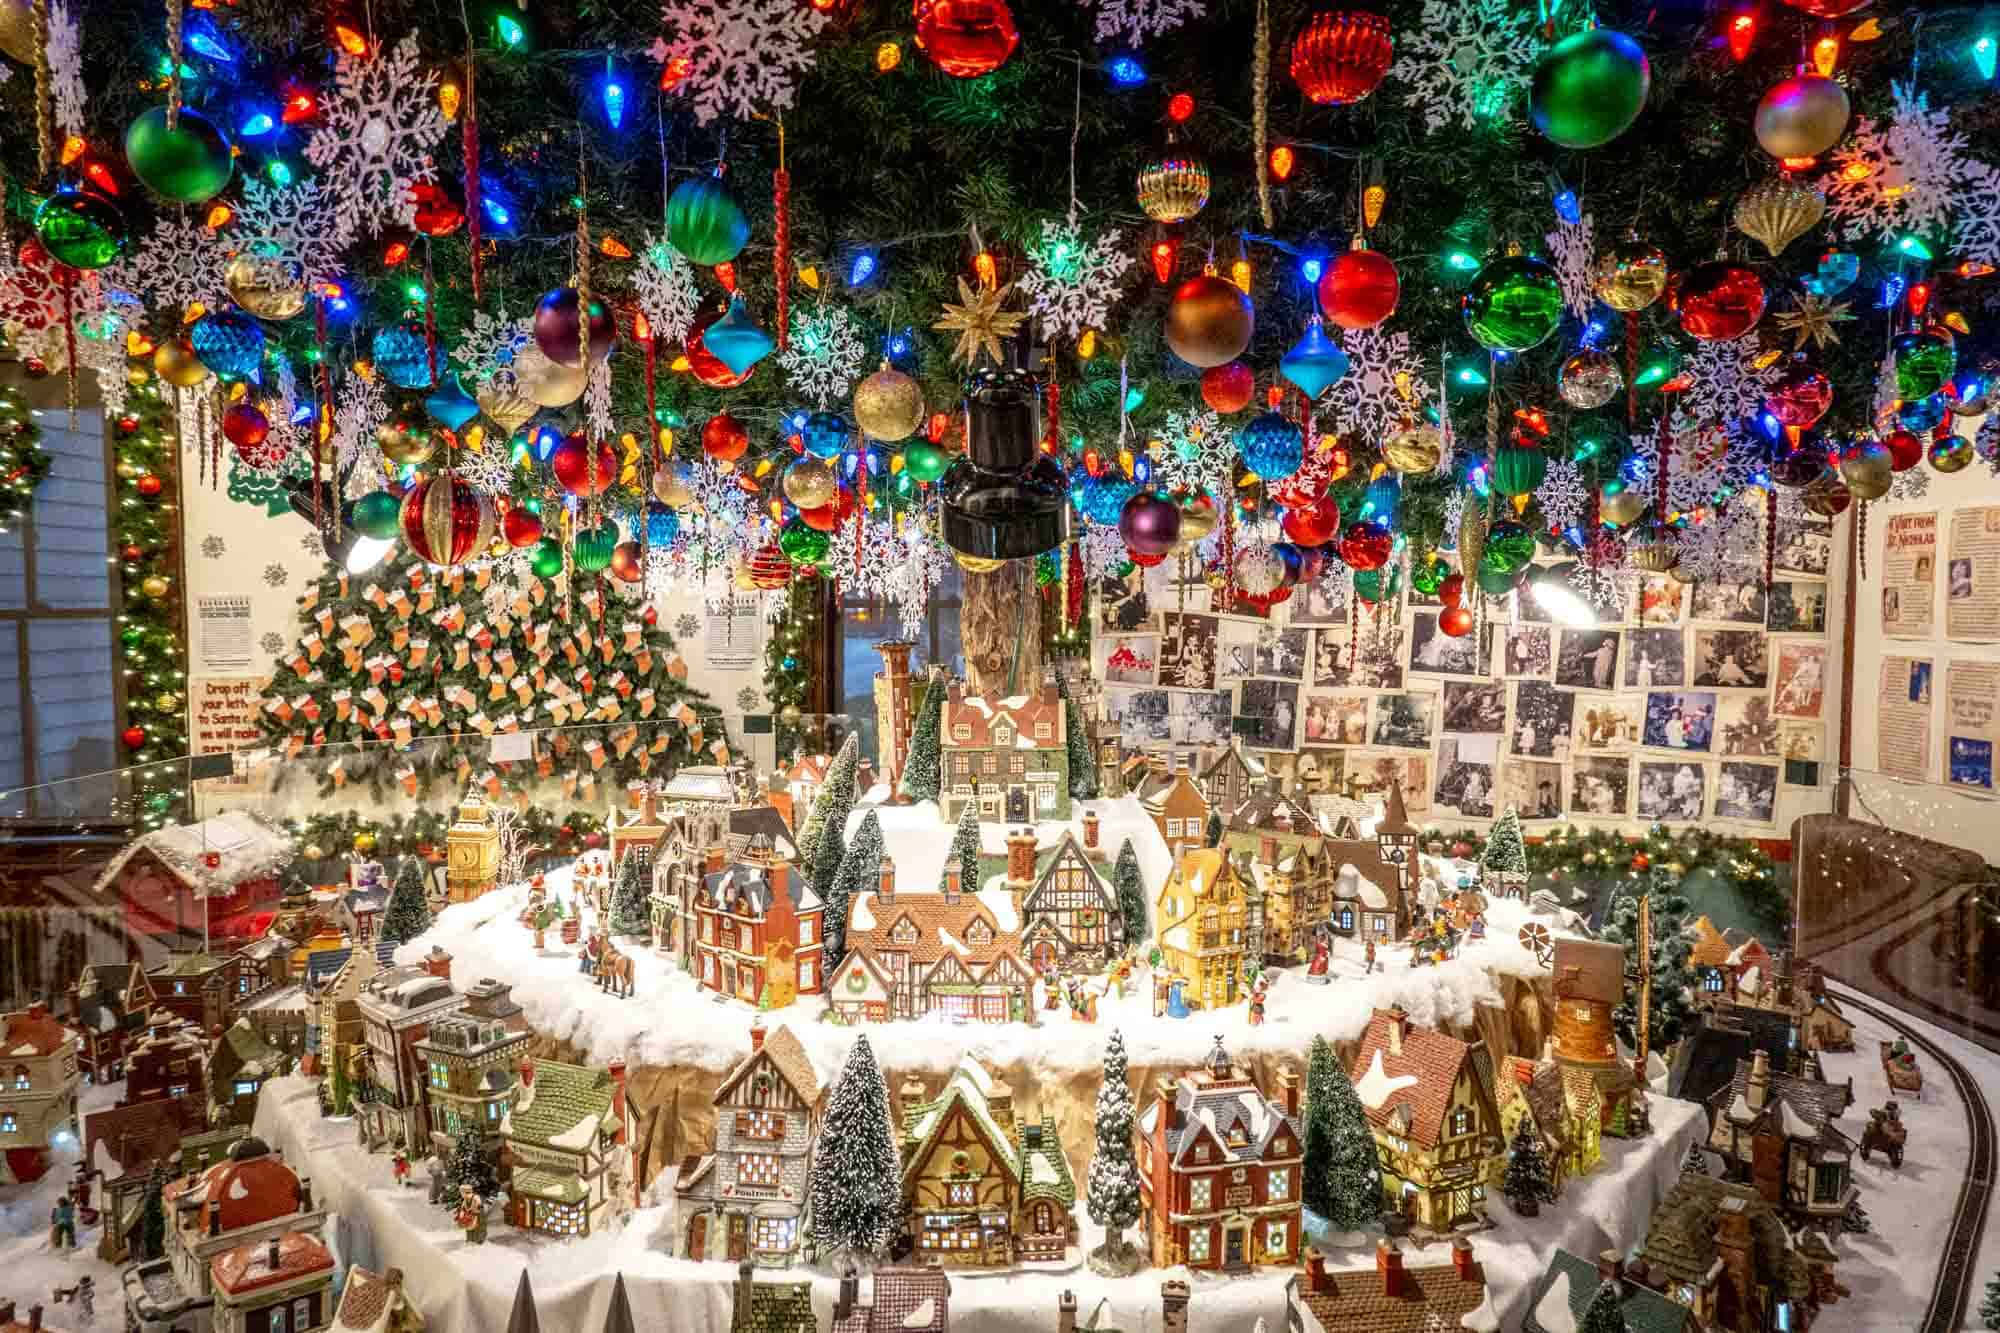 Exhibit featuring Christmas ornaments and miniature houses